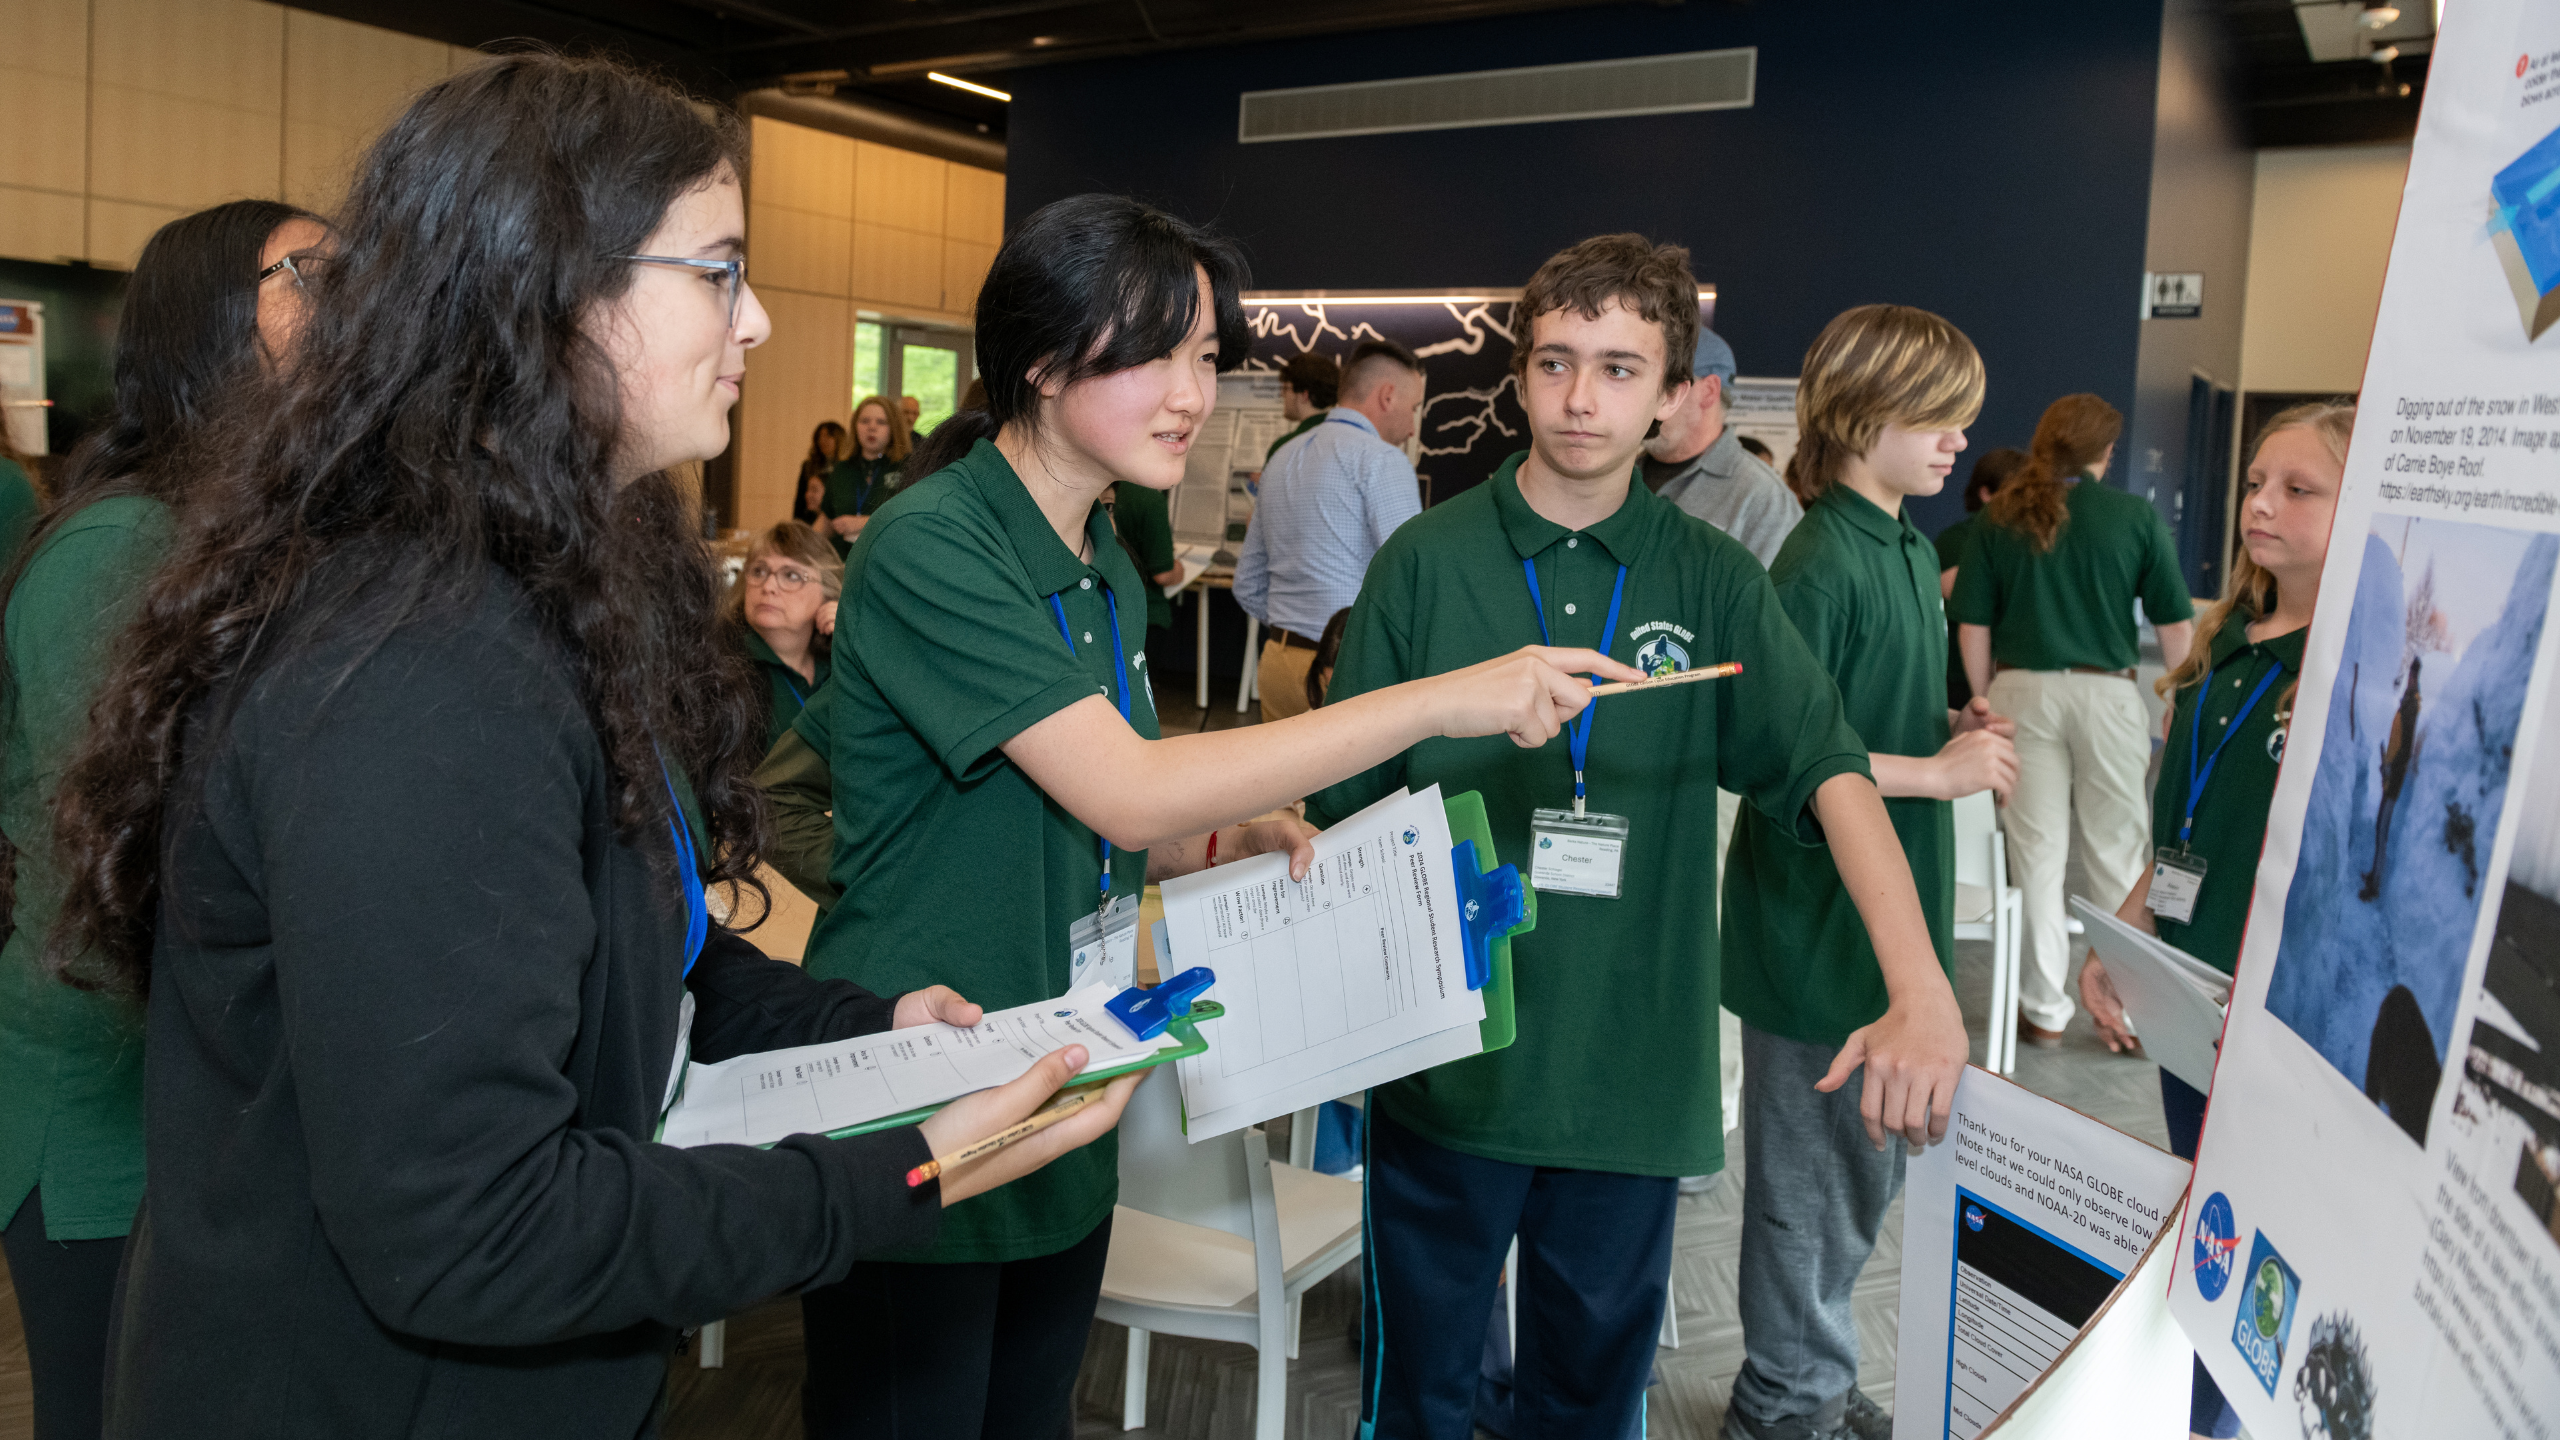 students review each other's posters at the student research symposium (photo by Susan L Angstadt